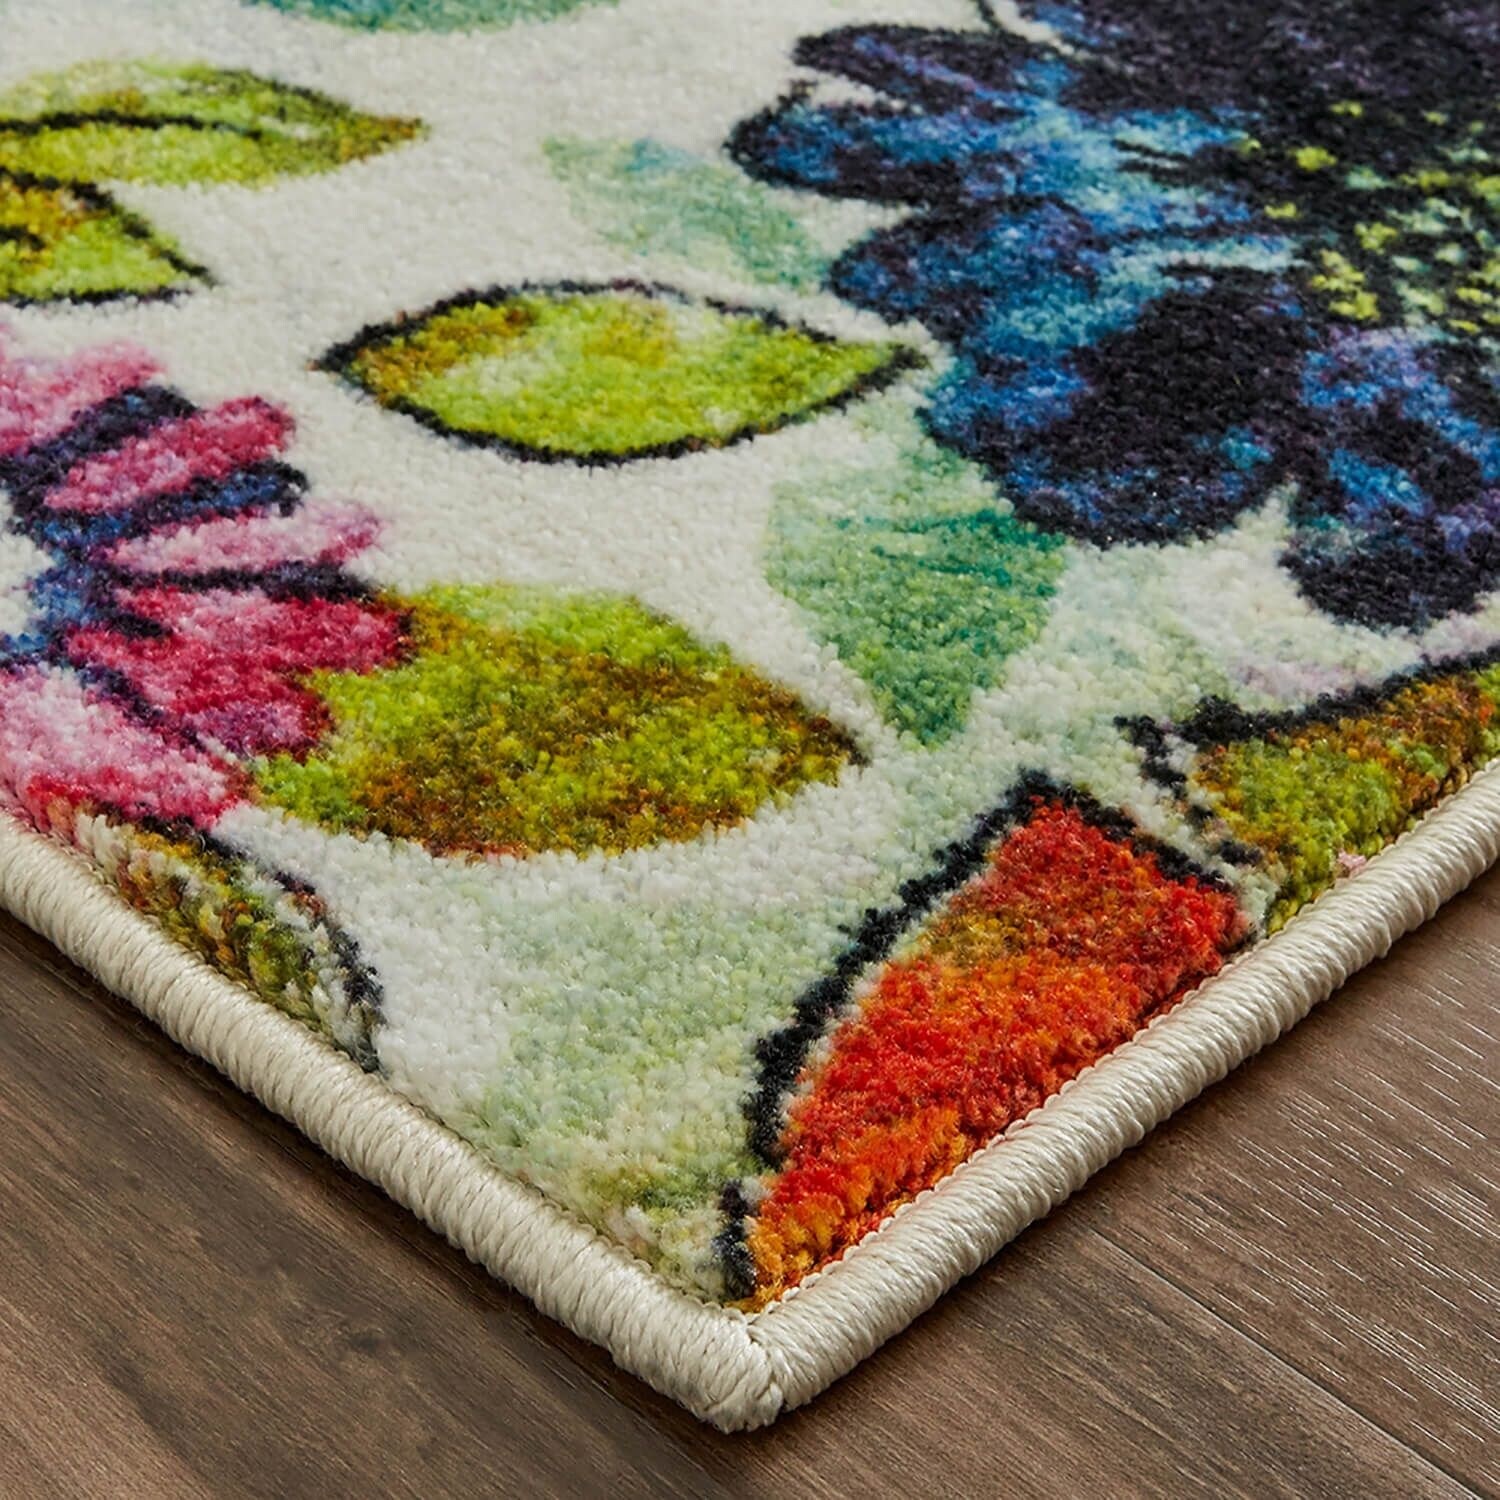 https://ak1.ostkcdn.com/images/products/is/images/direct/6183d4a2904624b2422ddbb8f7cd13552832a074/Mohawk-Home-Floral-Blossoms-Area-Rug.jpg